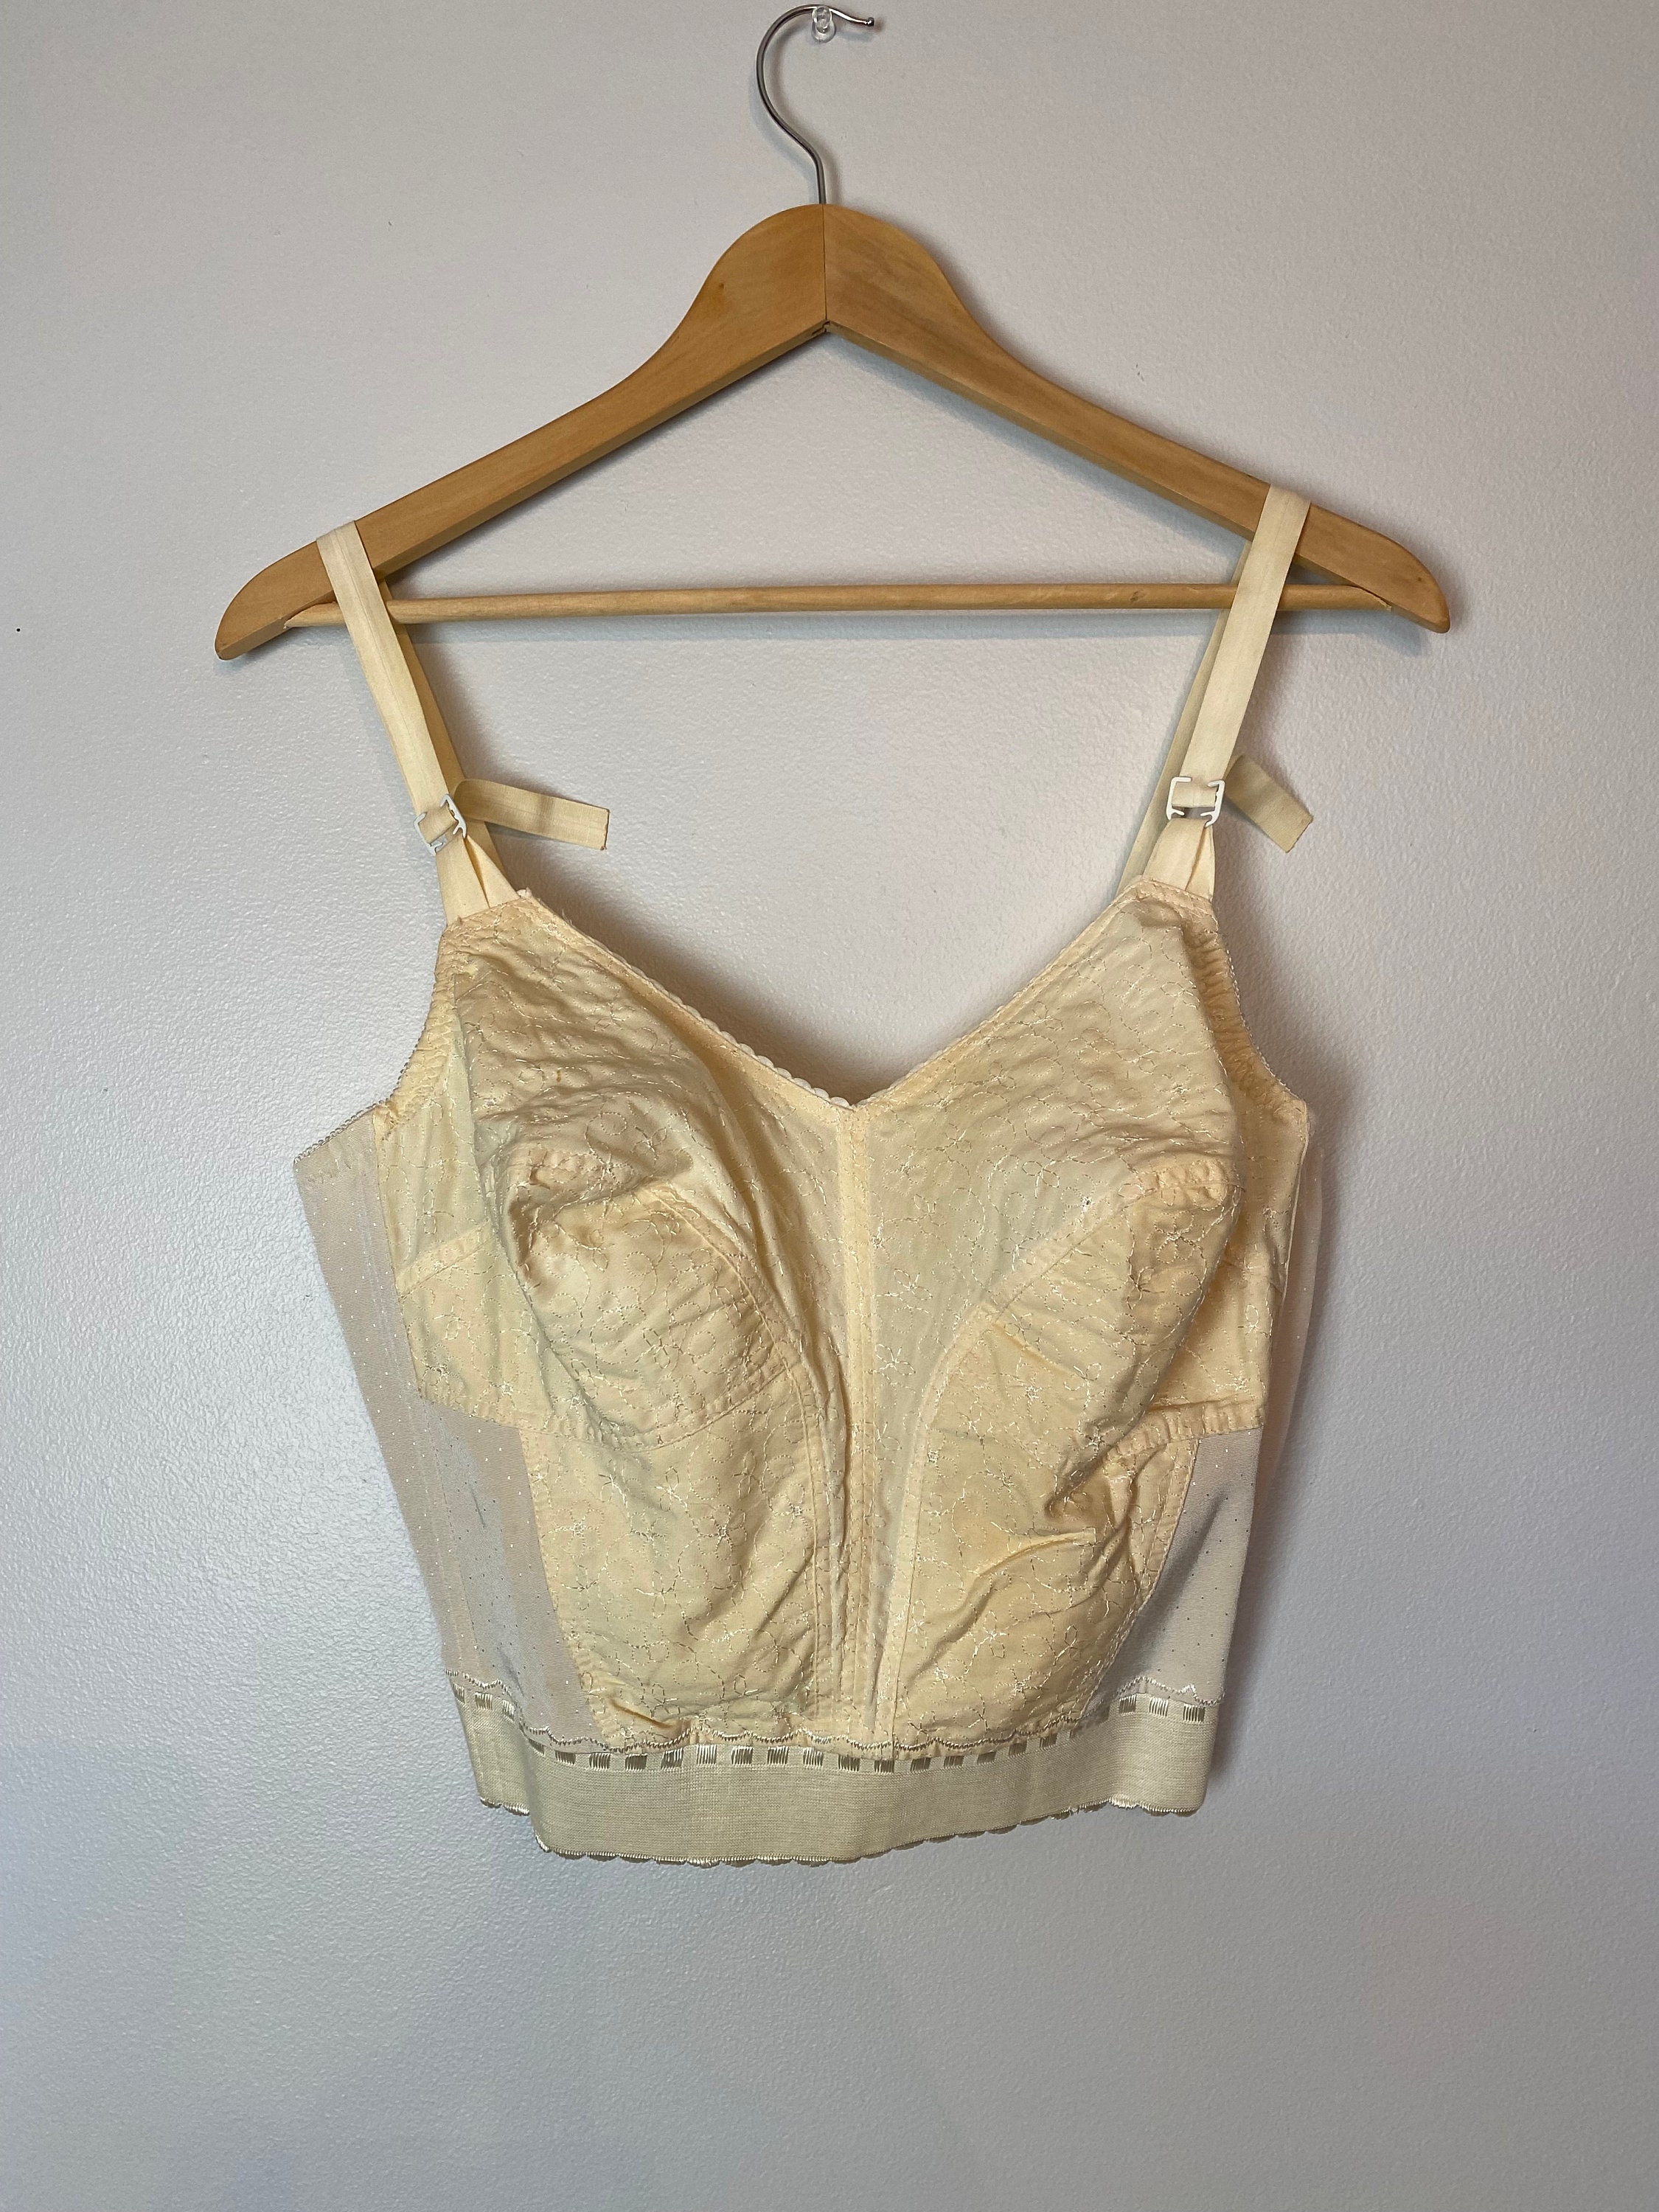 Buy Vintage 1950s Bullet Bra 40 C Cotton Deadstock Rockabilly Pinup Style  Penneys Adonna Cage Bra Online in India 